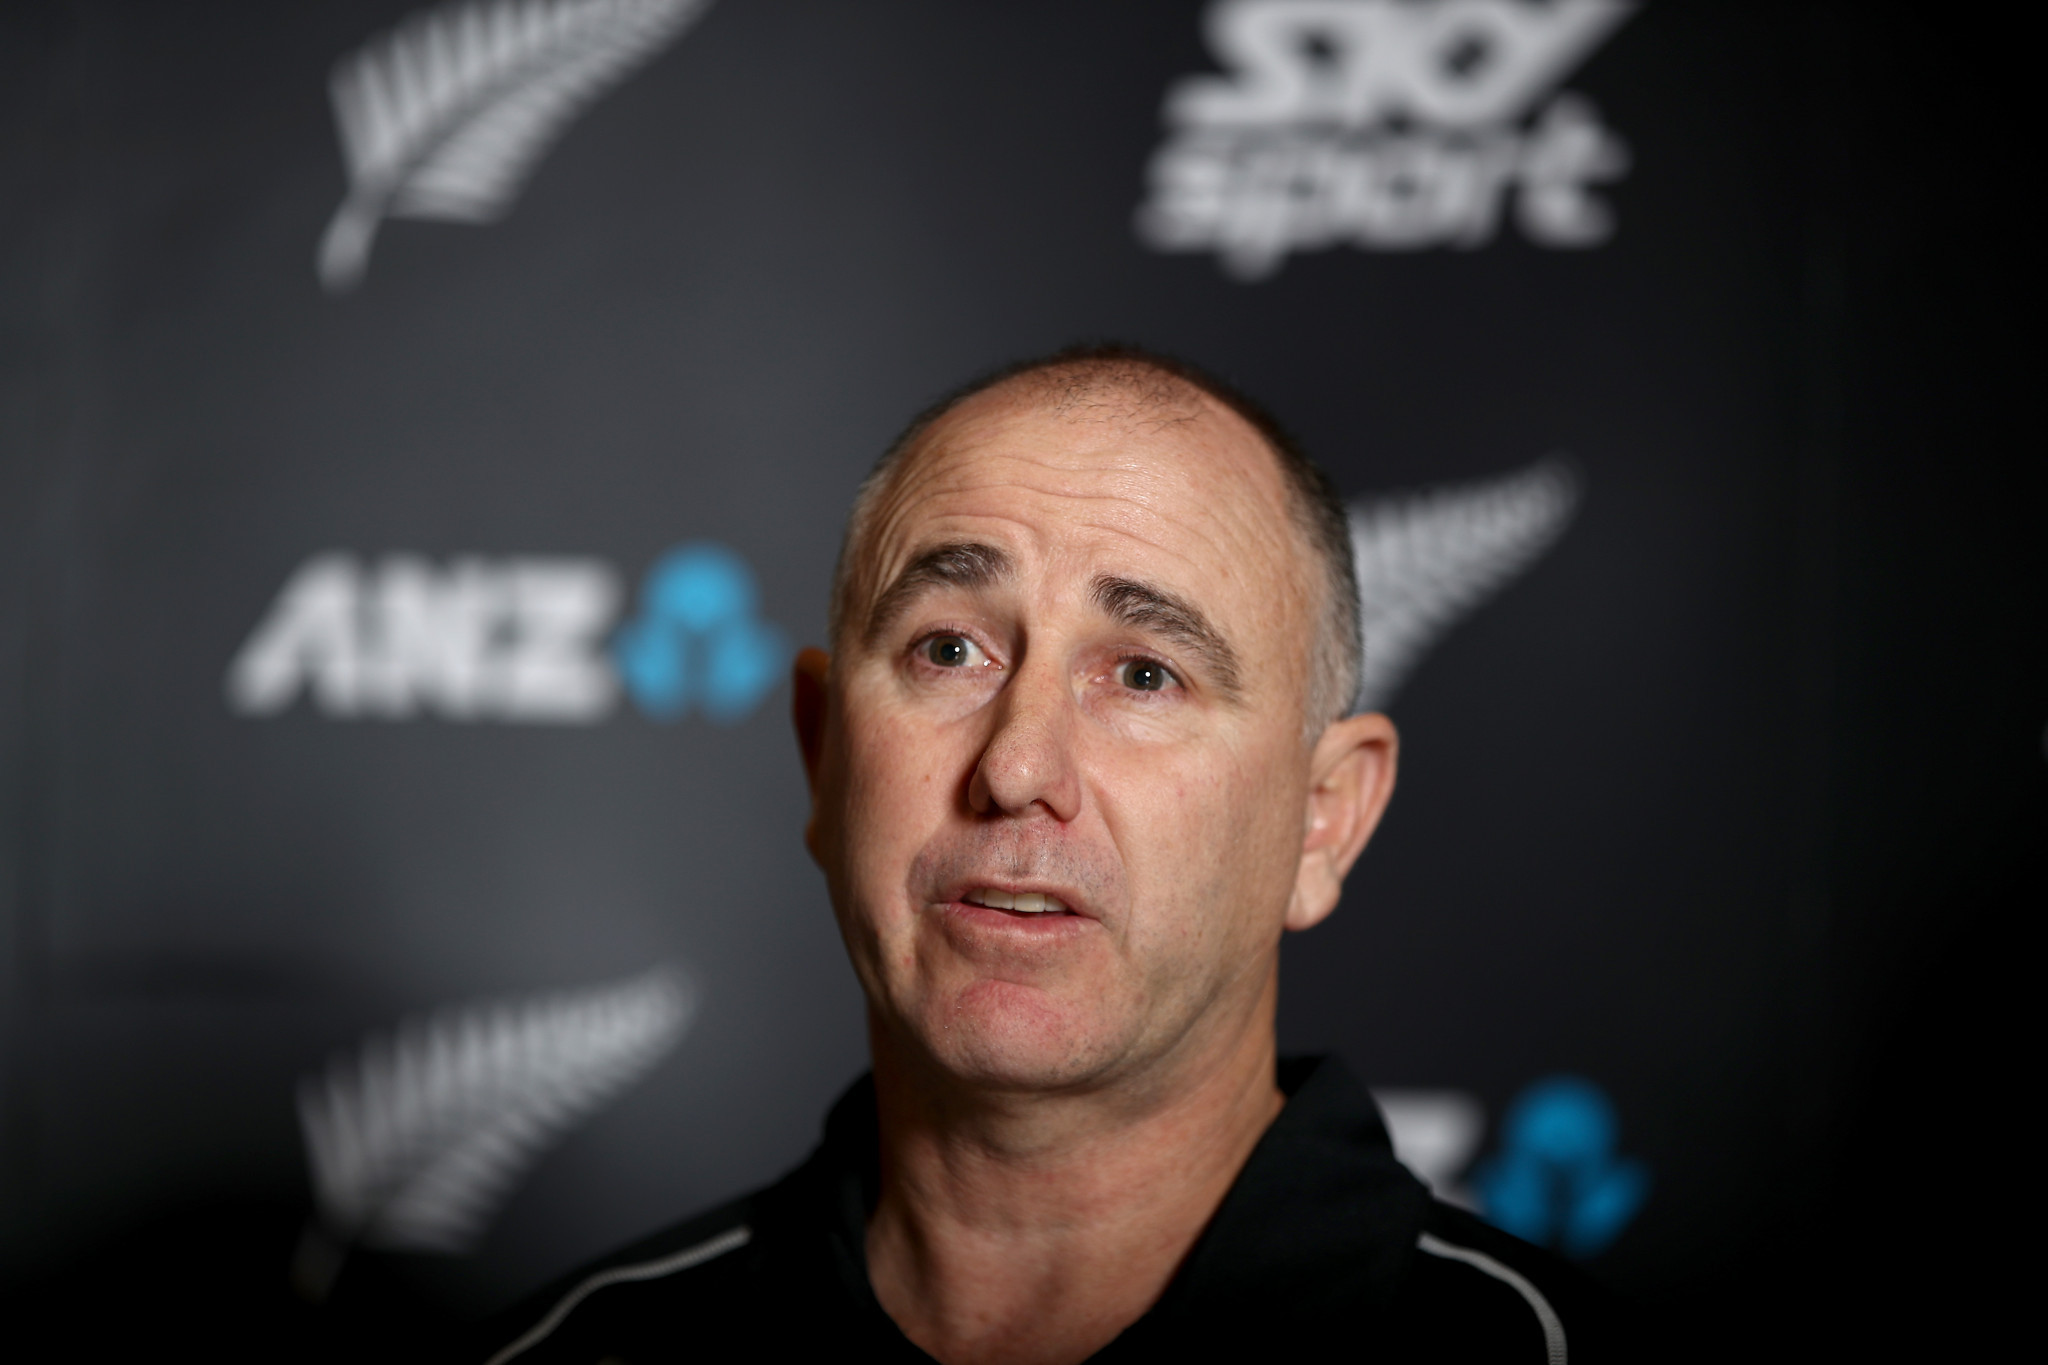 Stead named head coach of New Zealand men's cricket team on two-year deal